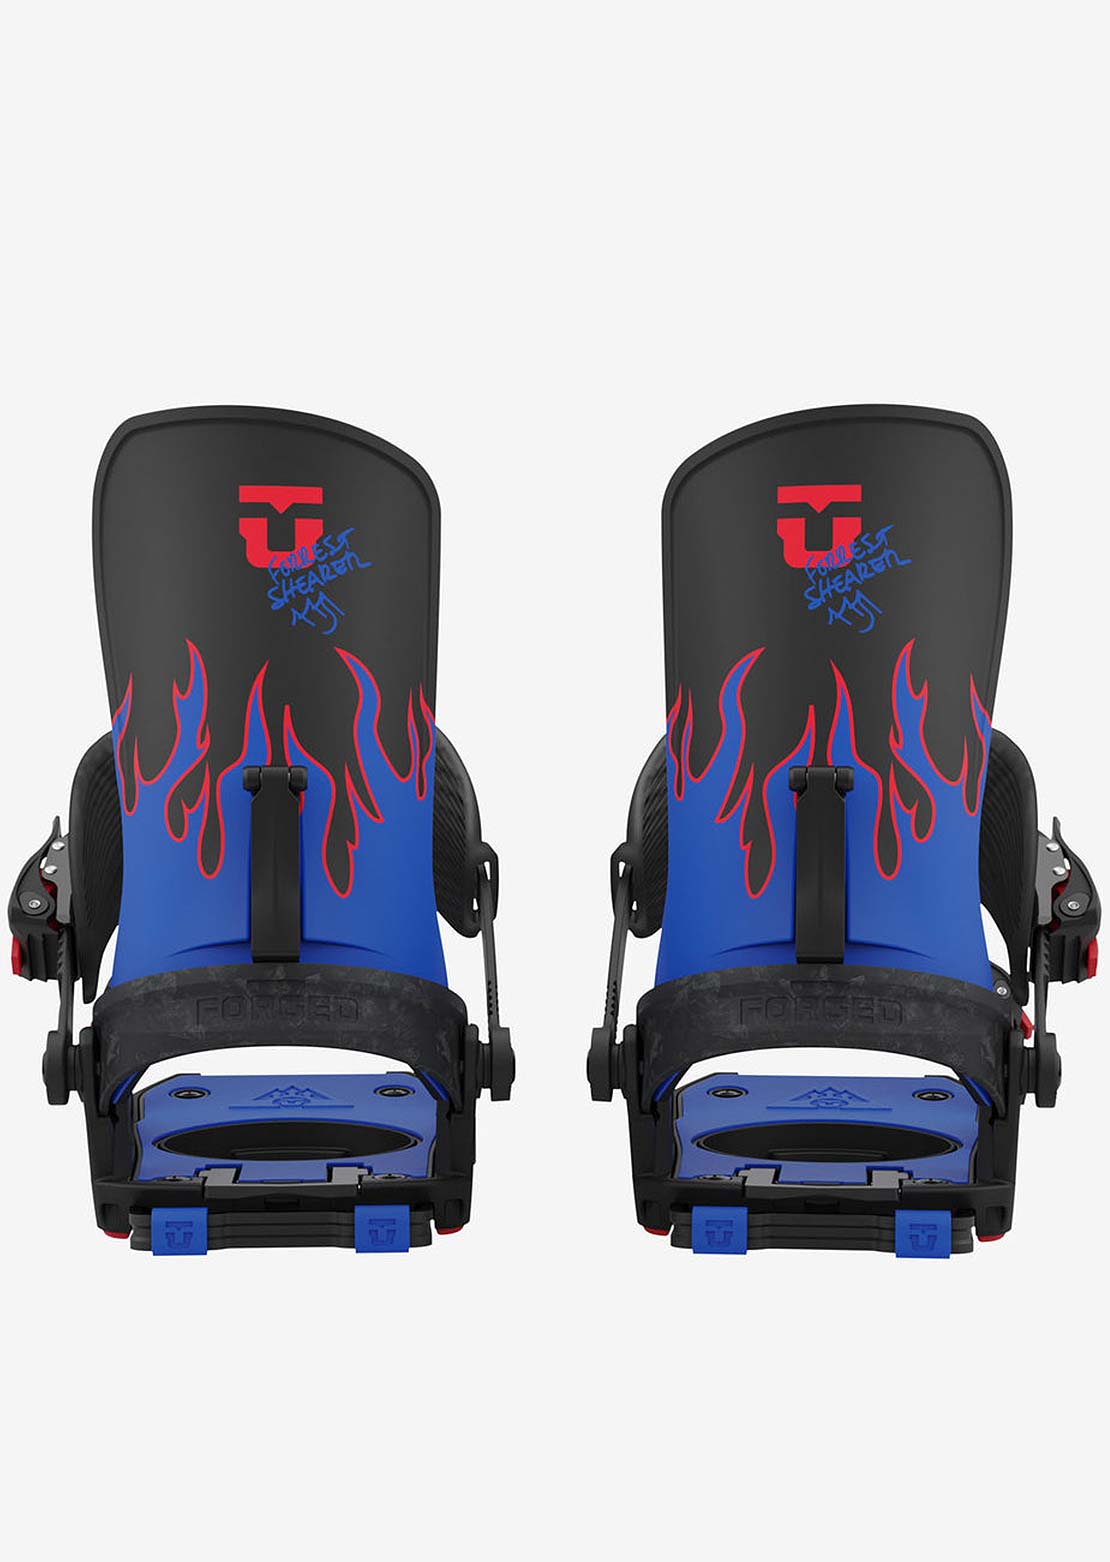 Union Forrest Shearer Charger Pro Snowboard Bindings Blue Flame